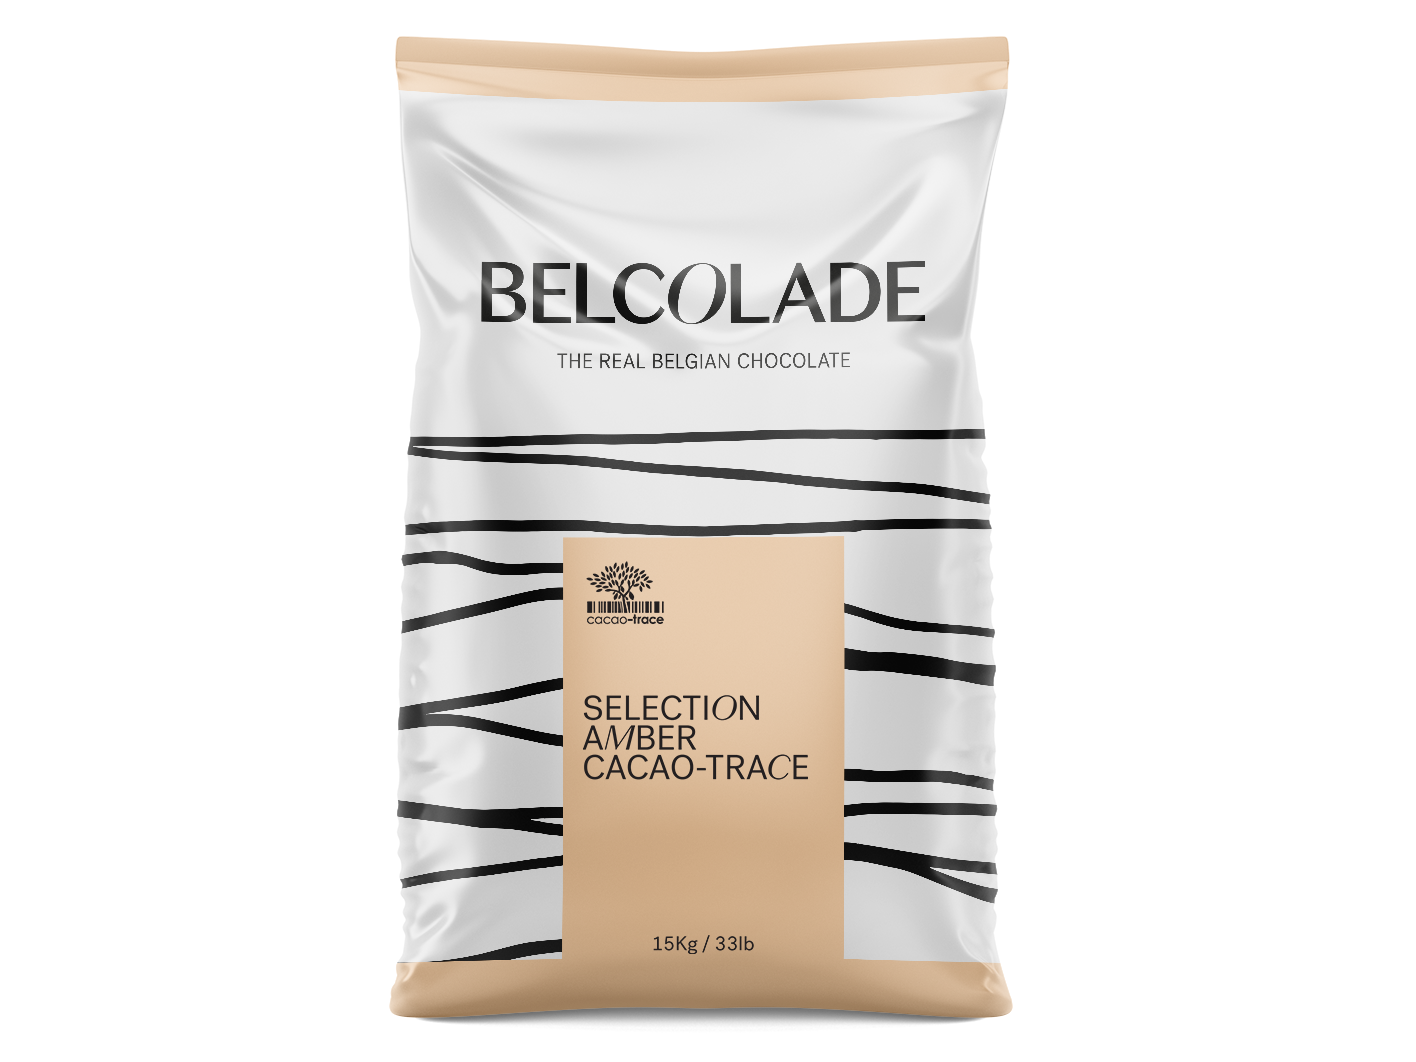 Belcolade selection amber cacao-trace